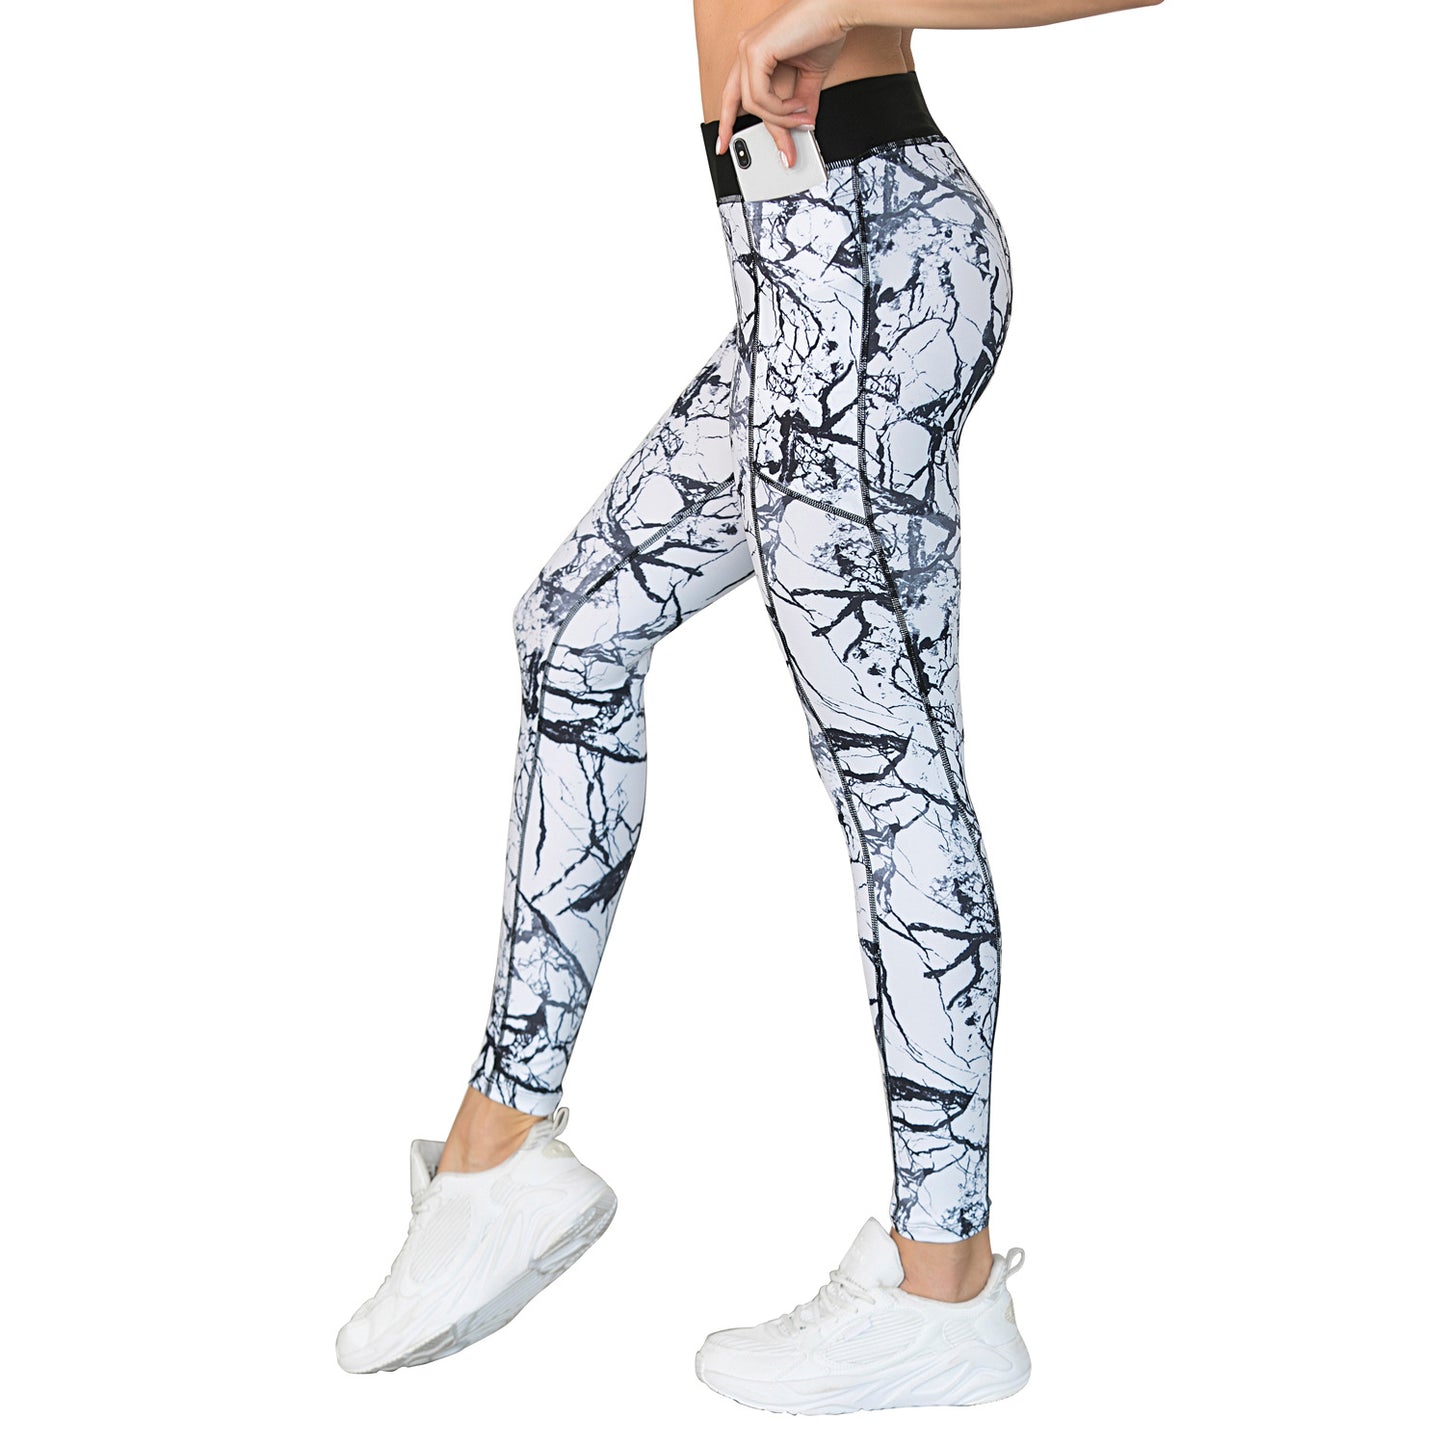 European And American Workout Clothes Yoga Clothes Running Suits Leggings Sports Bras - ladieskits